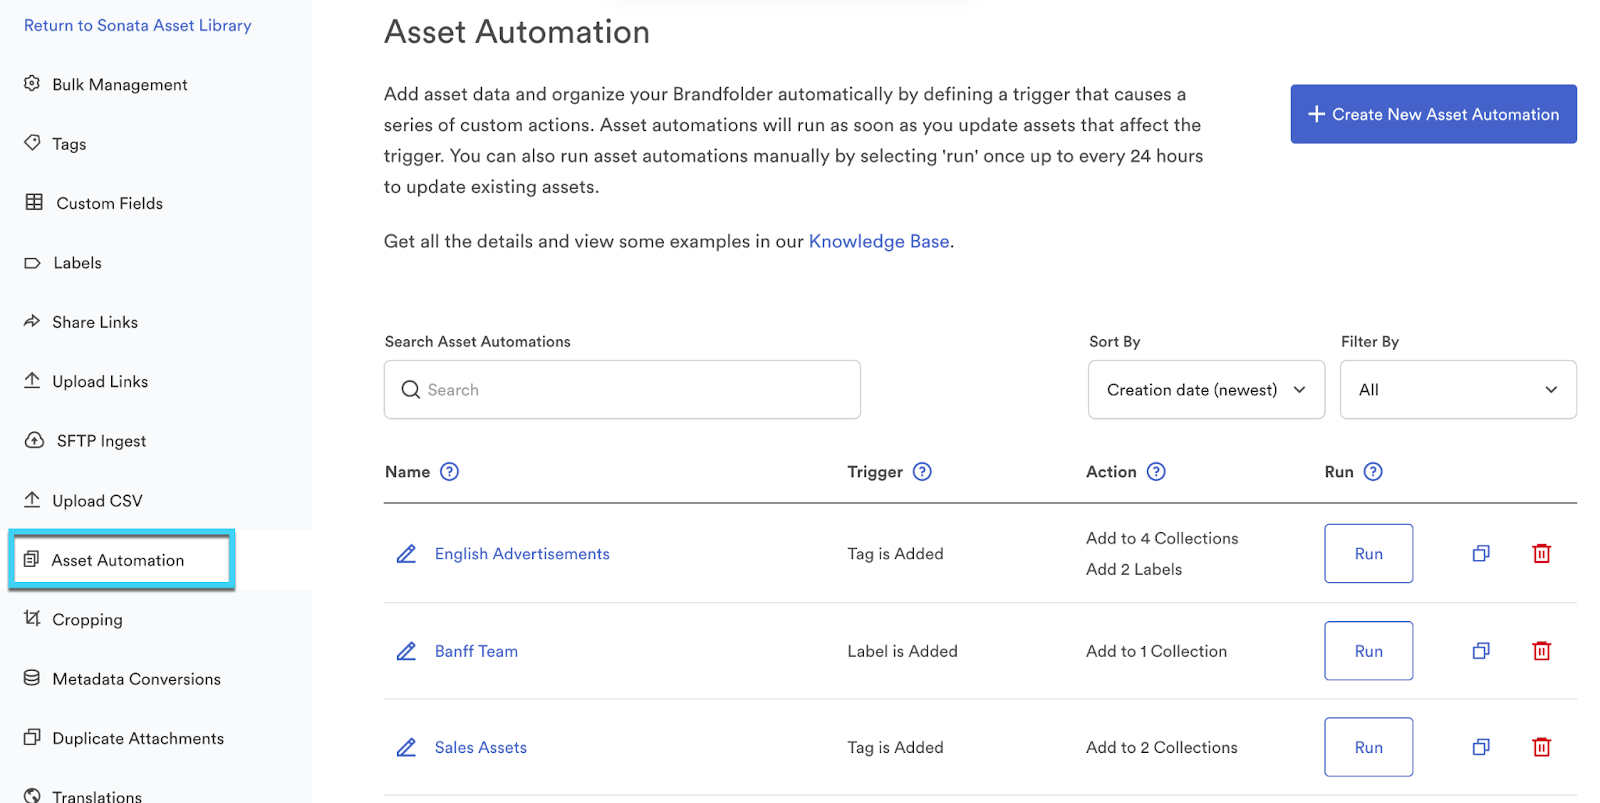 Asset automation page with a chart in the middle that includes name, trigger, action, and run. On the left hand side navigation asset automation is selected.